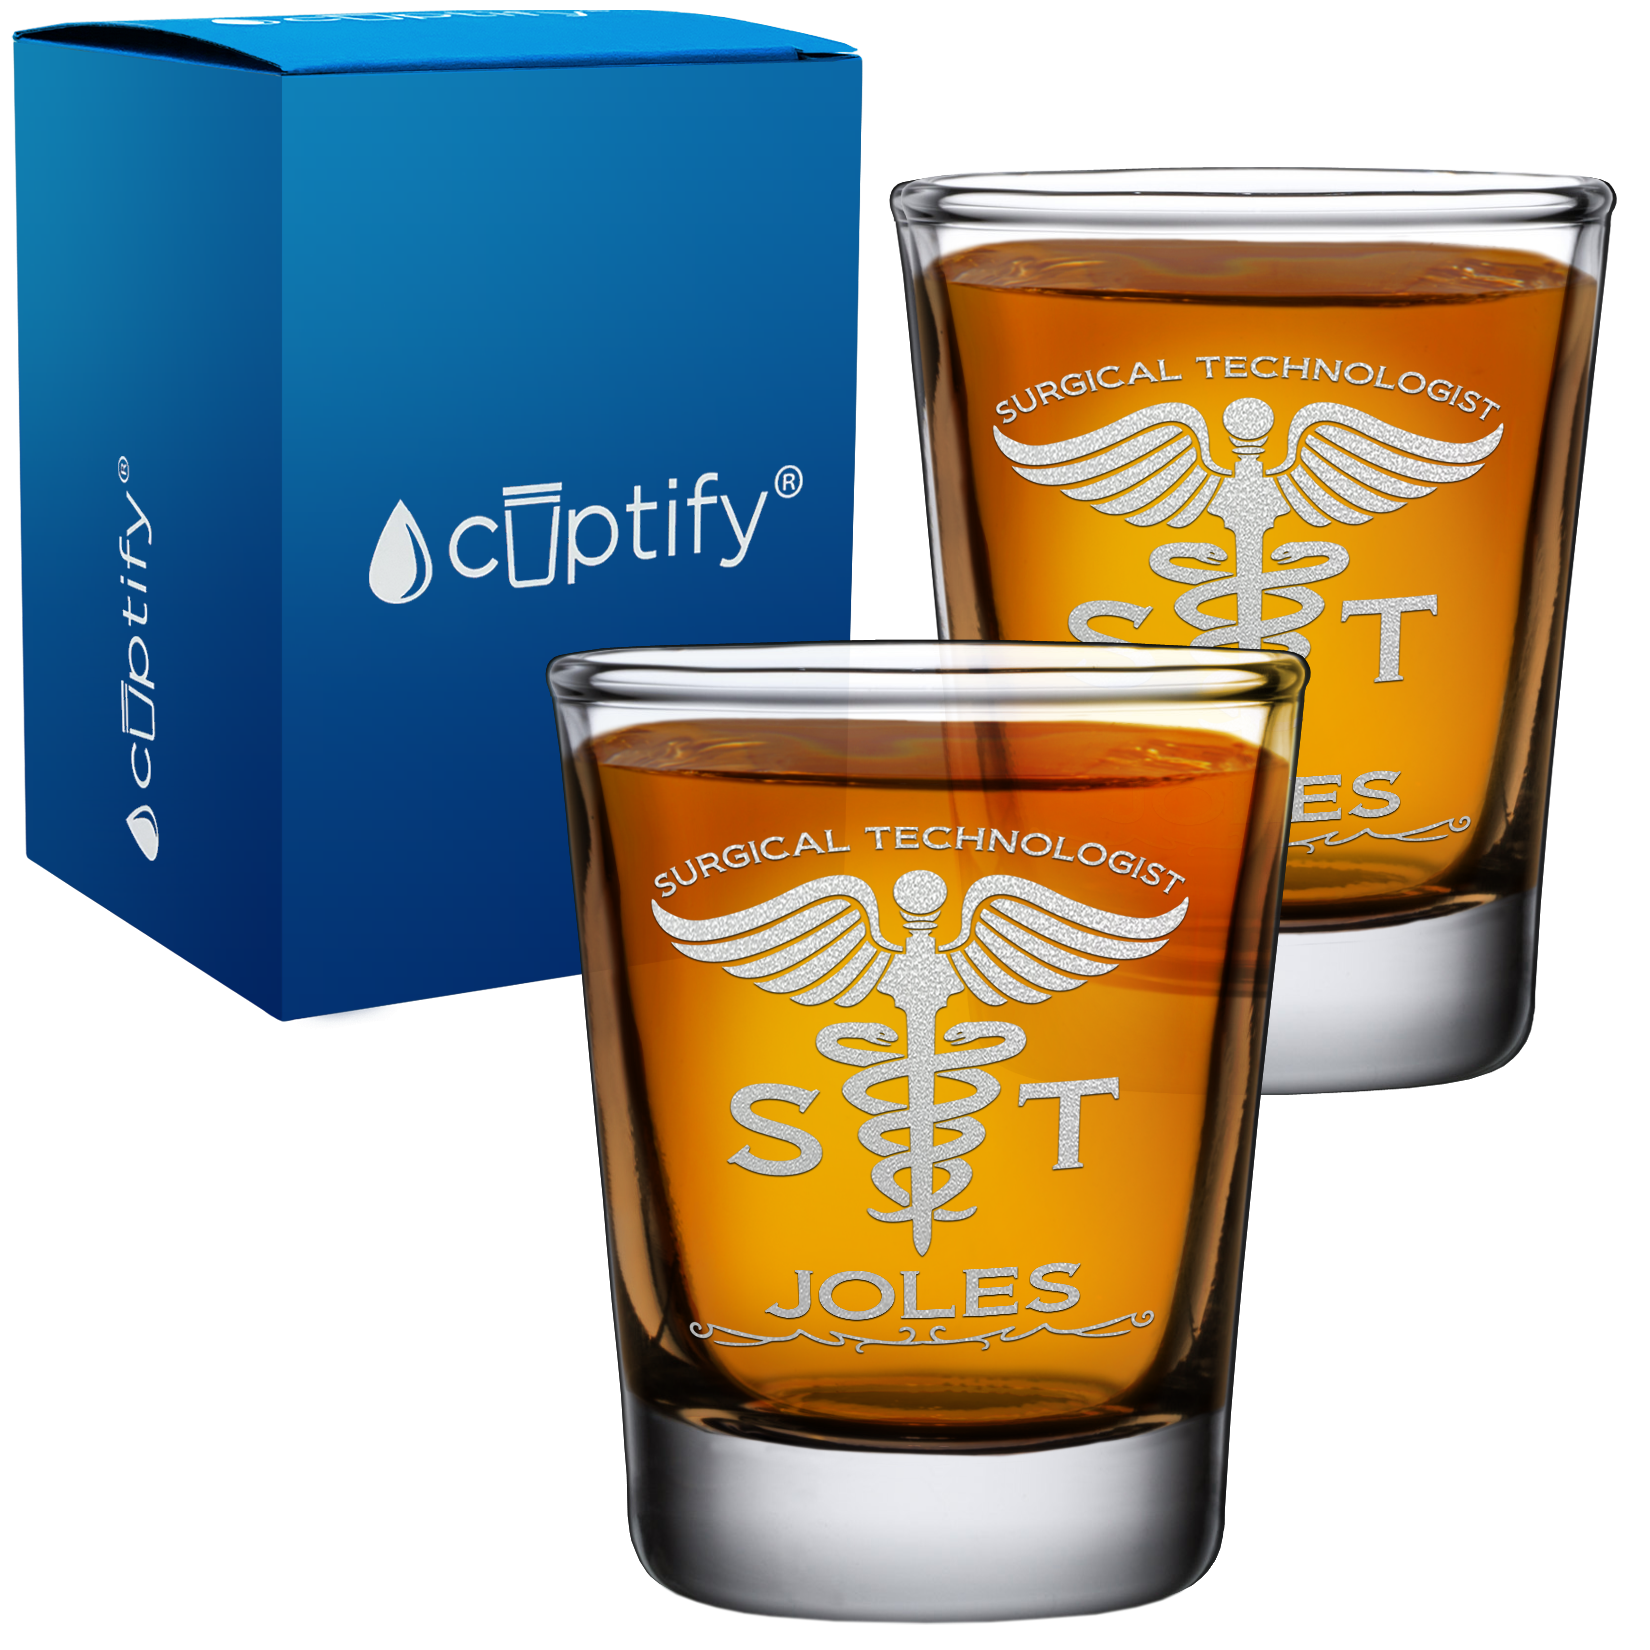 Personalized ST Surgical Technologist on 2oz Shot Glasses - Set of 2